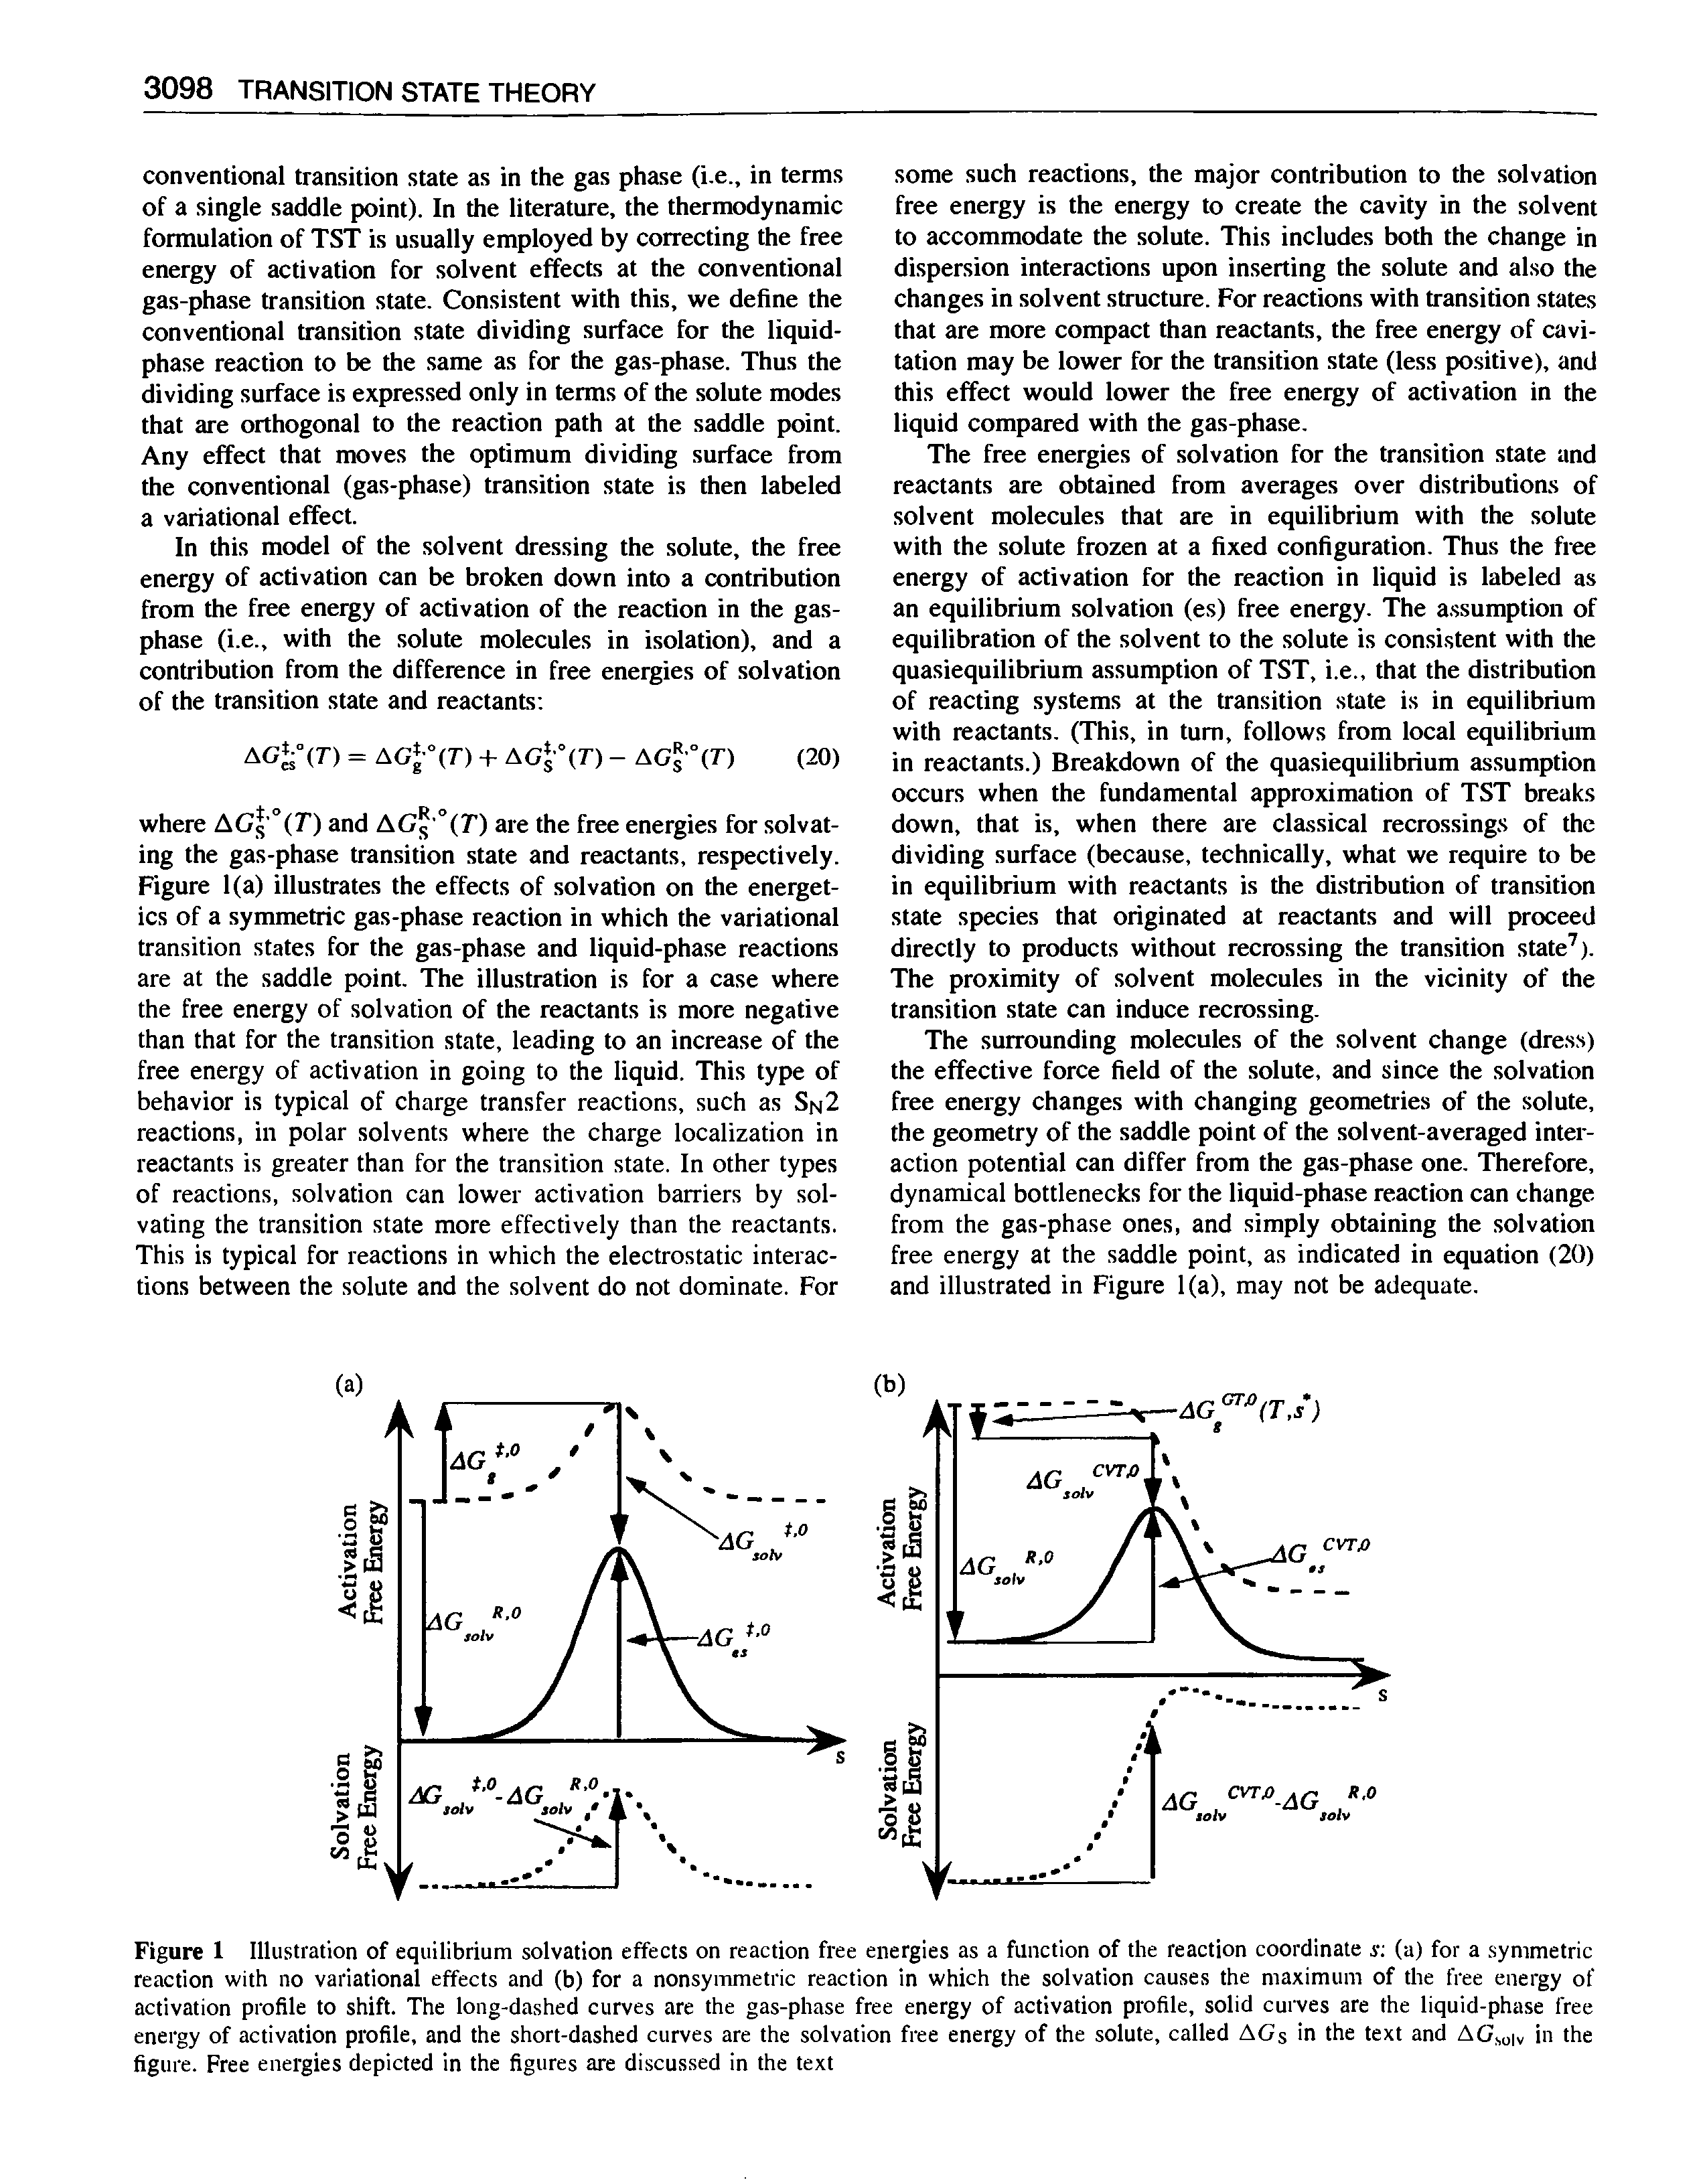 Figure 1 Illustration of equilibrium solvation effects on reaction free energies as a function of the reaction coordinate s (a) for a. symmetric reaction with no variational effects and (b) for a nonsymmetric reaction in which the solvation causes the maximum of the free energy of activation profile to shift. The long-dashed curves are the gas-phase free energy of activation profile, solid cui ves are the liquid-phase free energy of activation profile, and the short-dashed curves are the solvation free energy of the solute, called AG in the text and AGsoiv in the figure. Free energies depicted in the figures are discussed in the text...